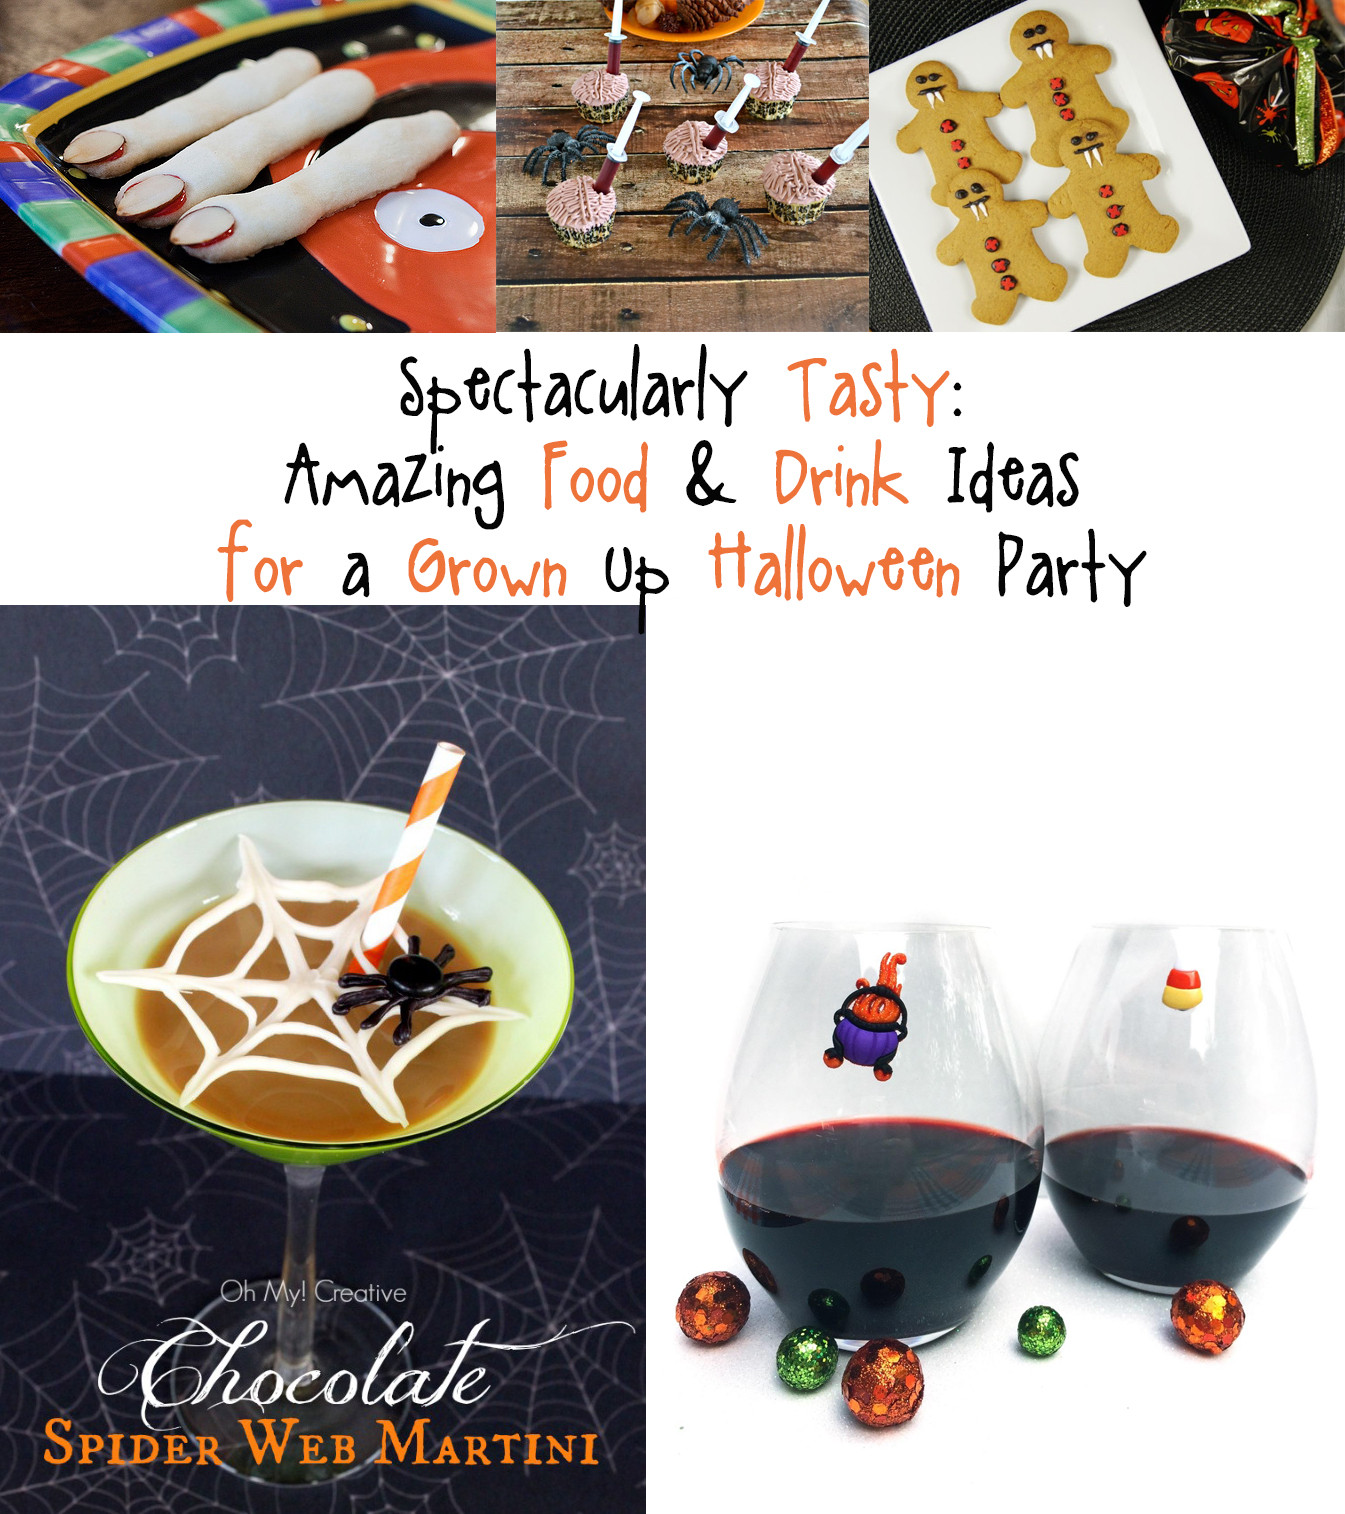 Grown Up Halloween Party Ideas
 Spectacularly Tasty Amazing Food & Drink Ideas for a